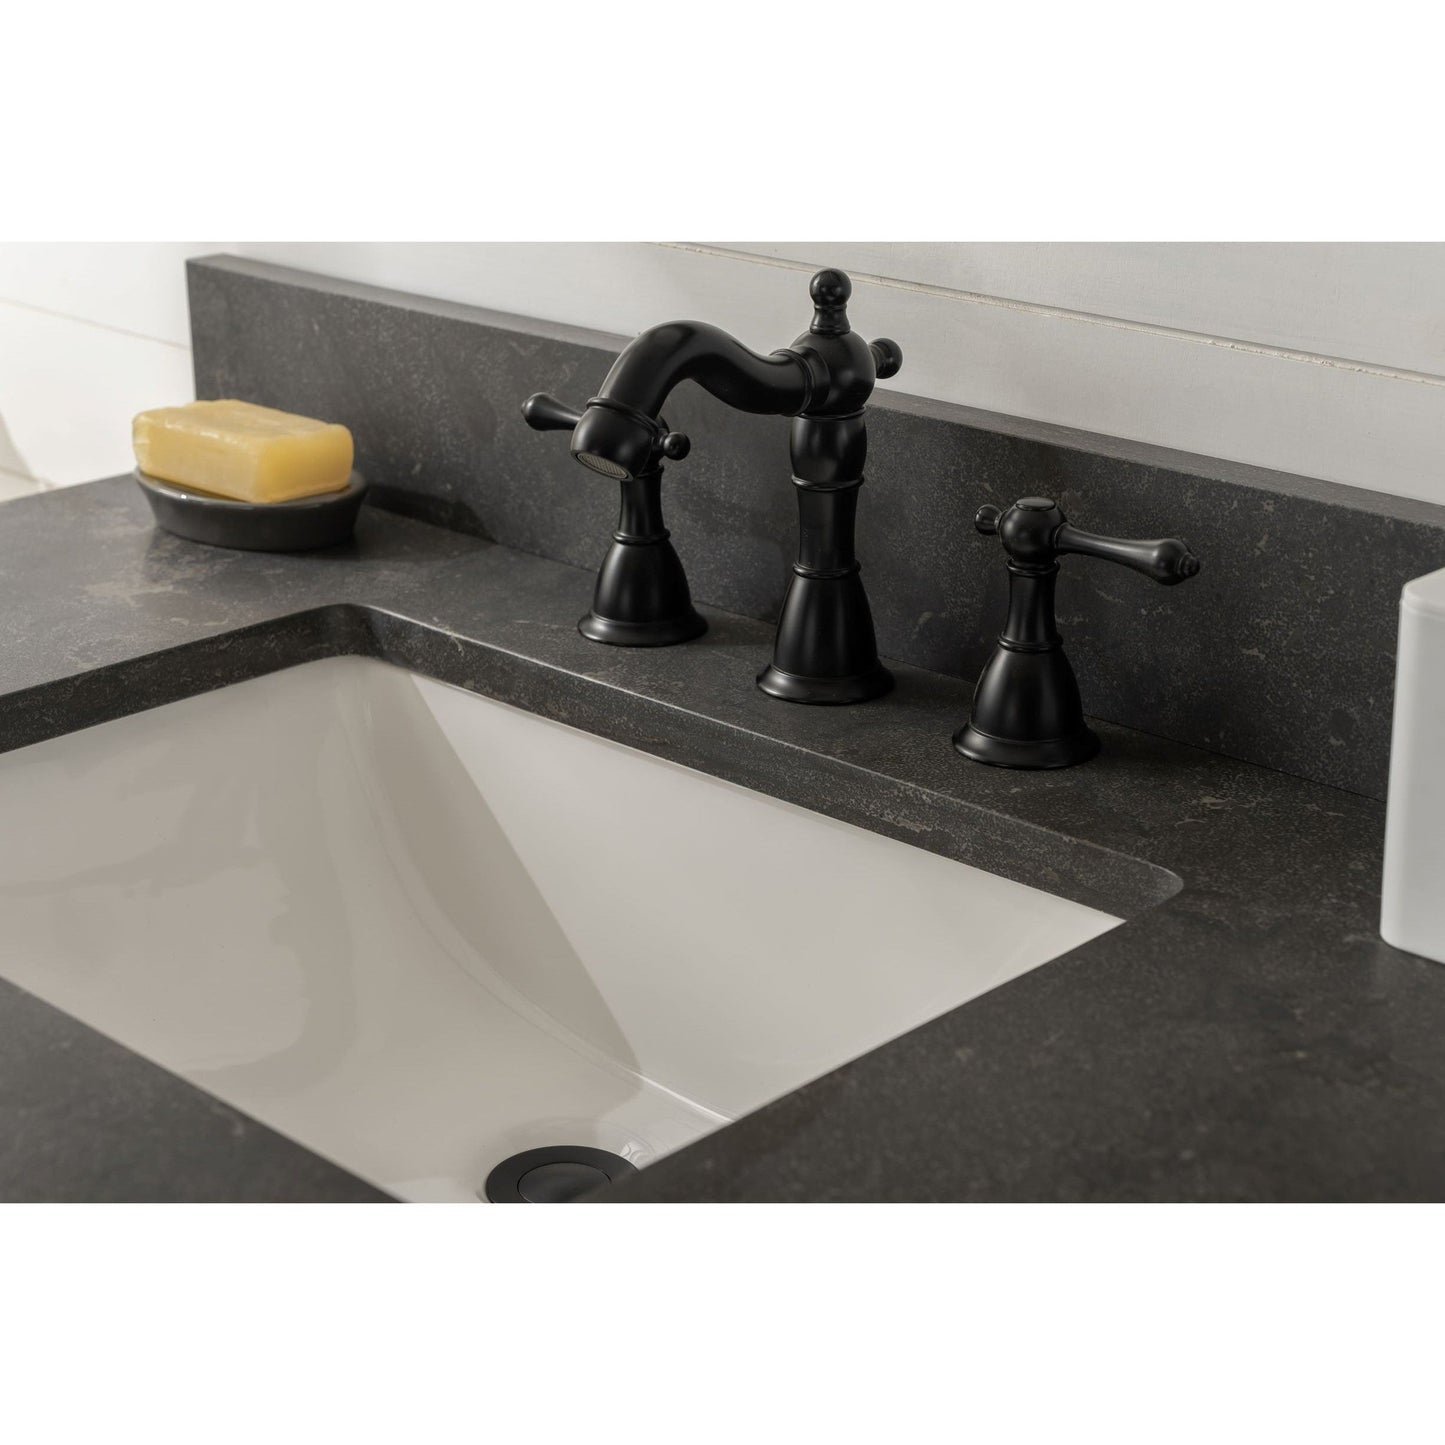 Legion Furniture WLF7040 36" Antique Gray Freestanding Vanity With Blue Limestone Top and White Ceramic Sink